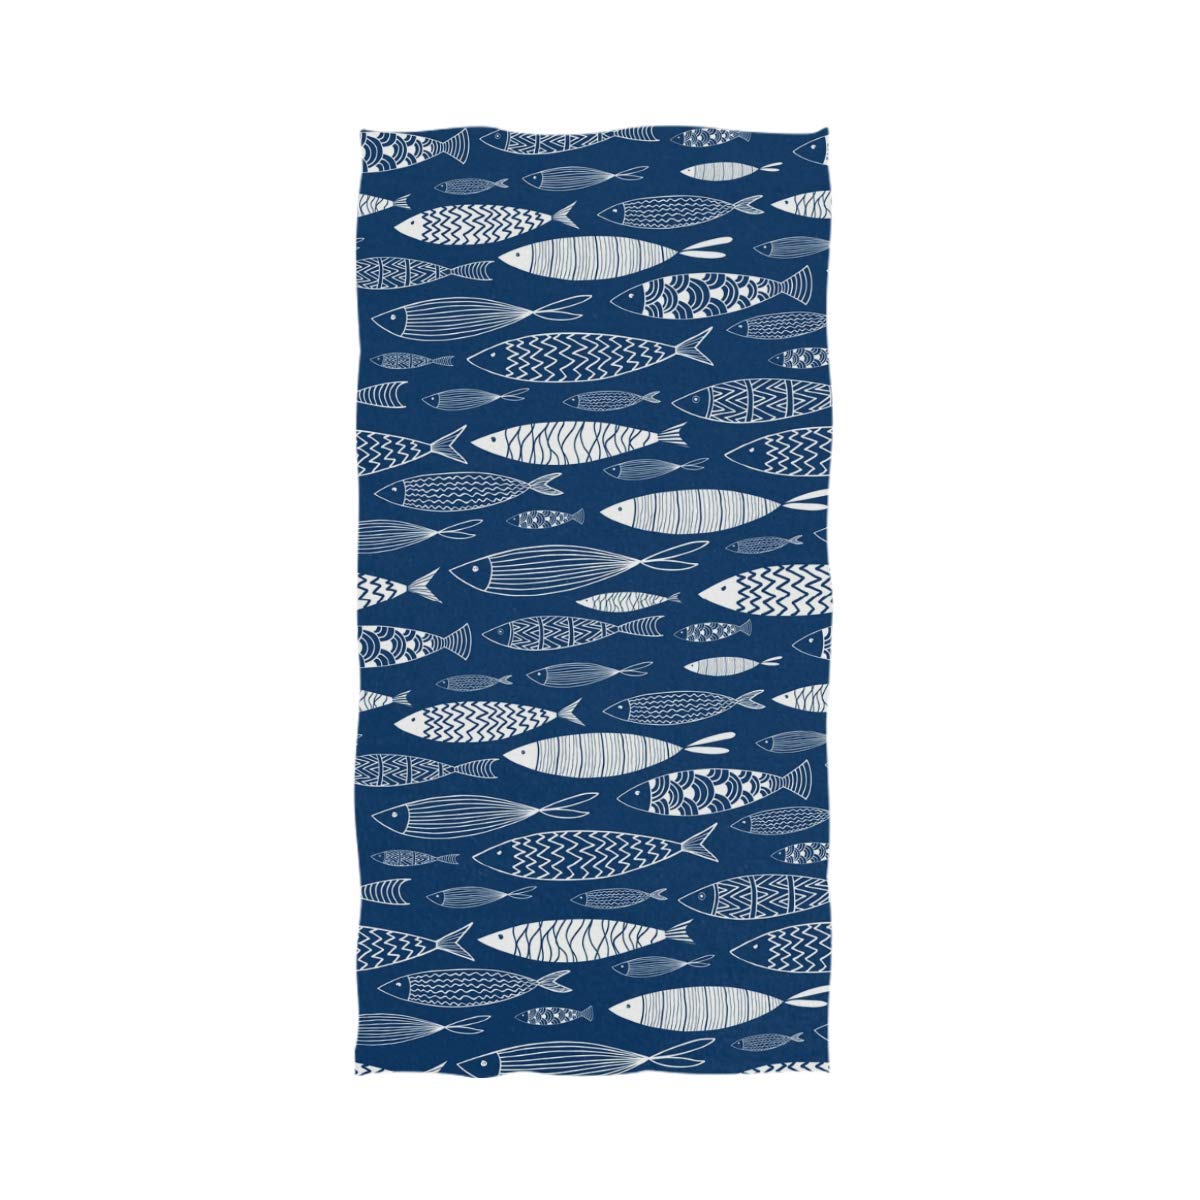 Naanle Stylish Realistic Underwater Shoal of Fish Soft Highly Absorbent  Large Hand Towels Multipurpose for Bathroom, Hotel, Gym and Spa (16 x  30,Navy Blue) Fishes